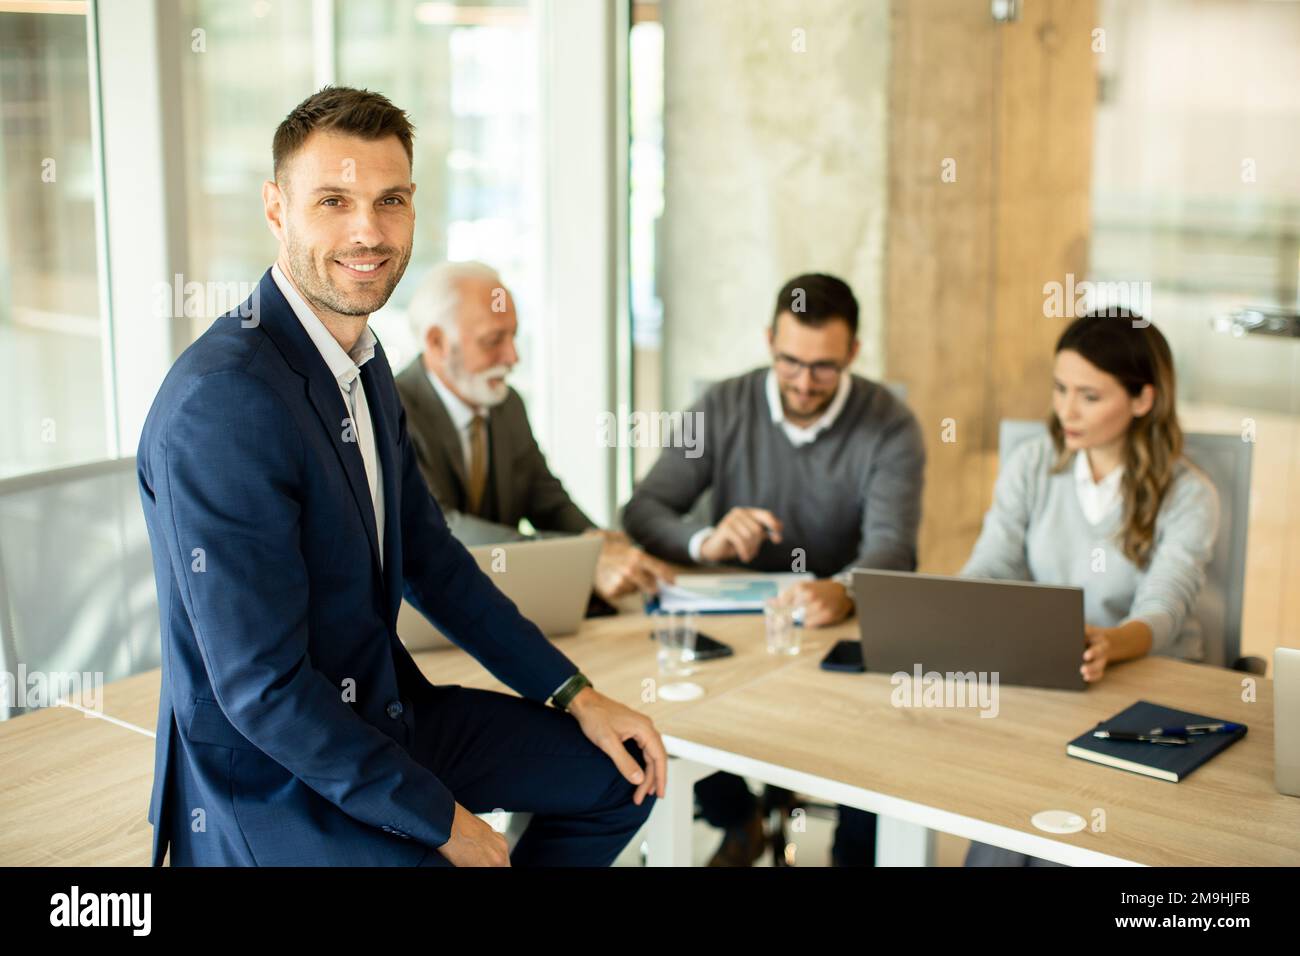 Handsome young businessman standing in front of his coleagues in the office Stock Photo